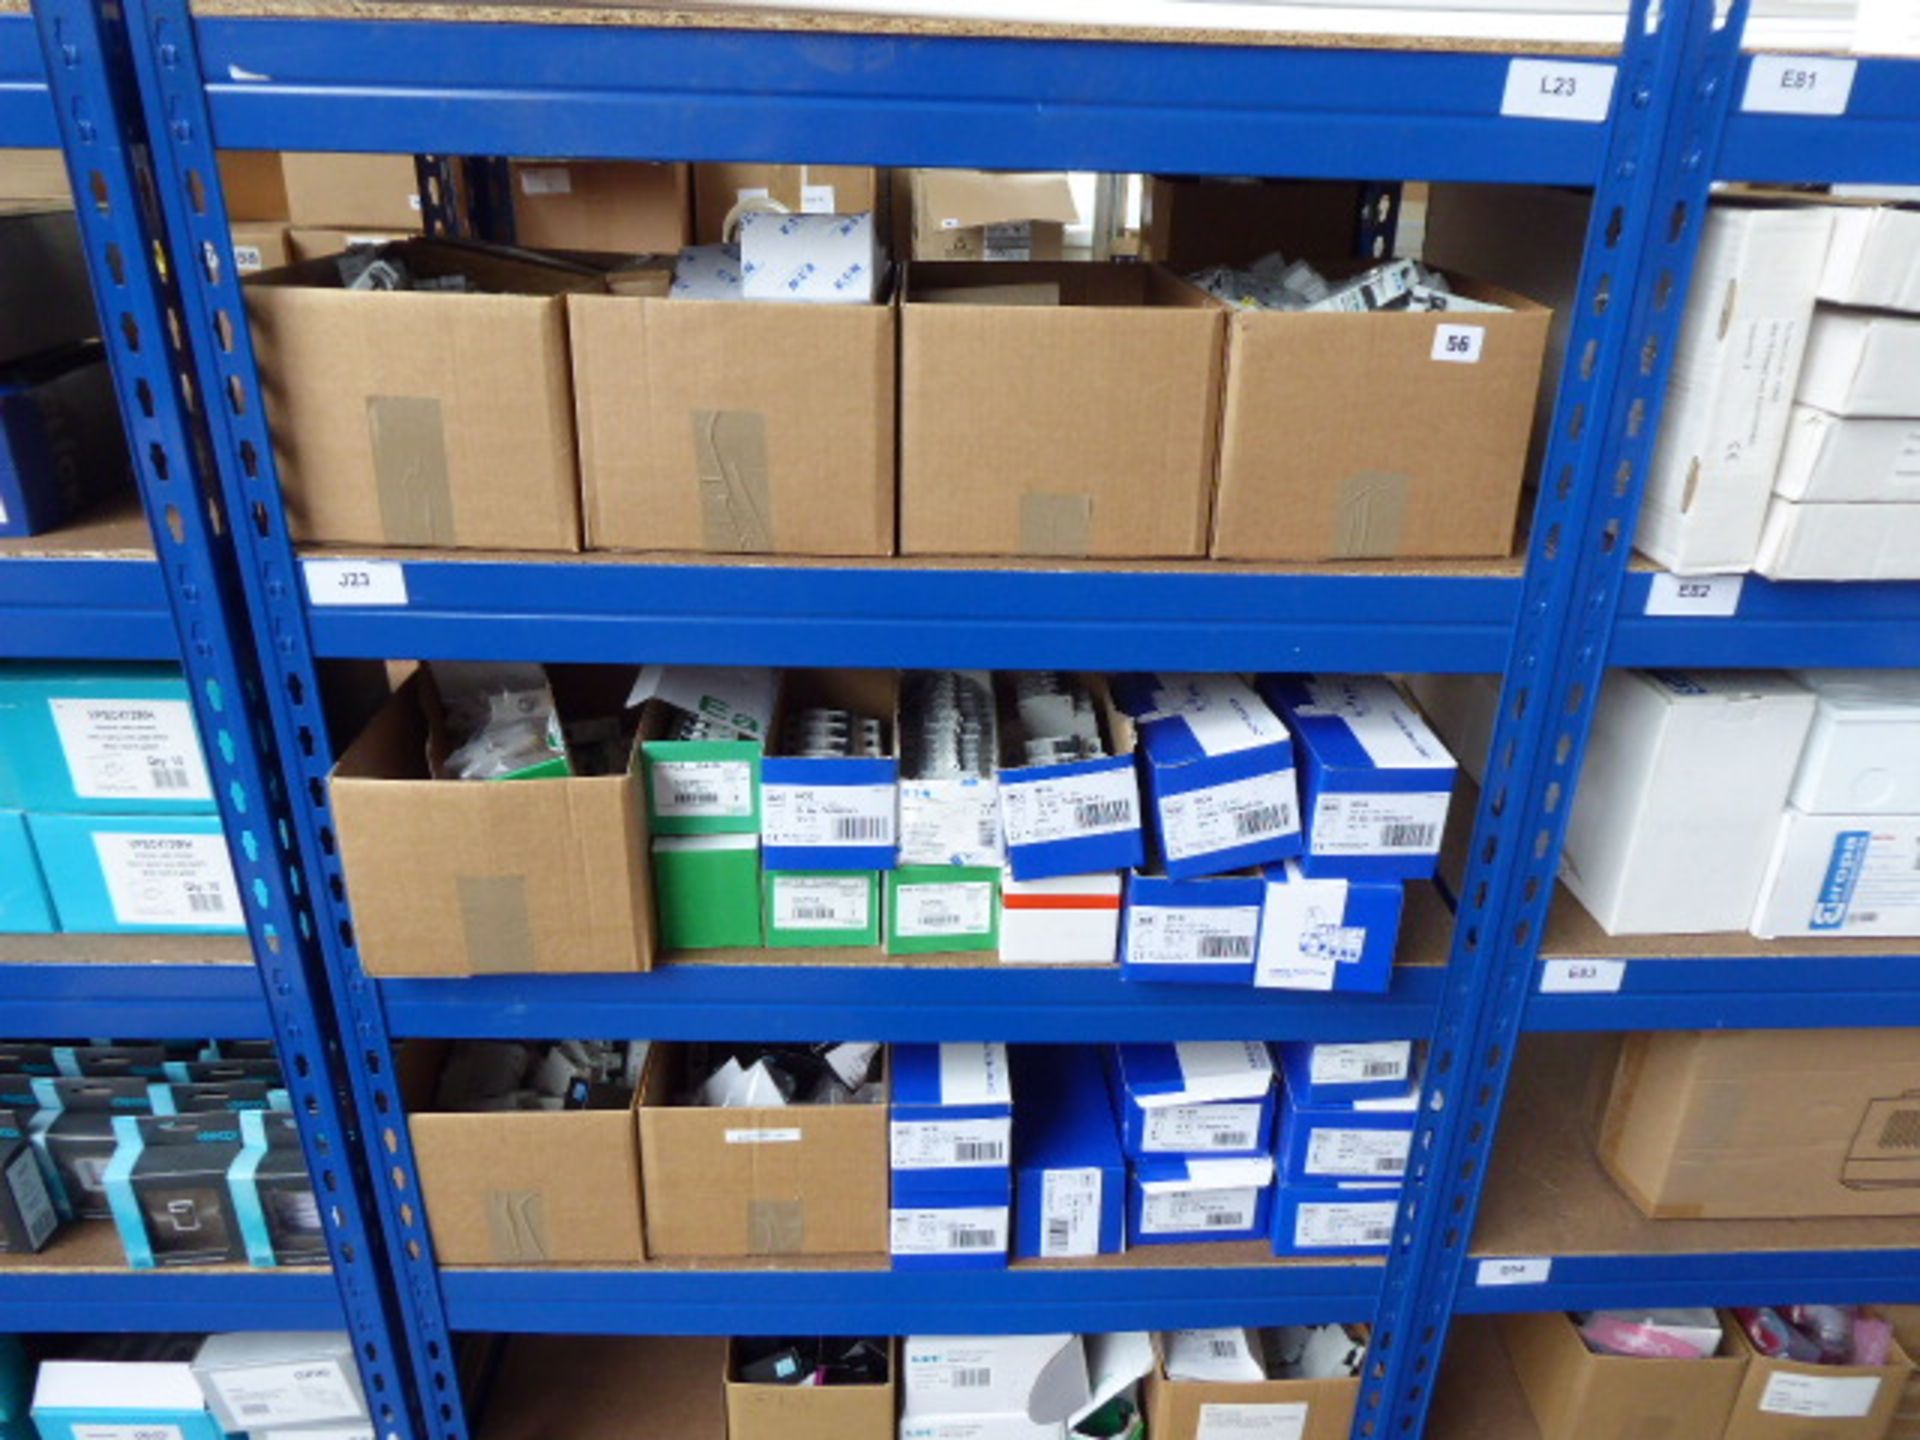 Approximately 40 boxes of LVE, BG, Eaton, and other electrical components including MCBs,